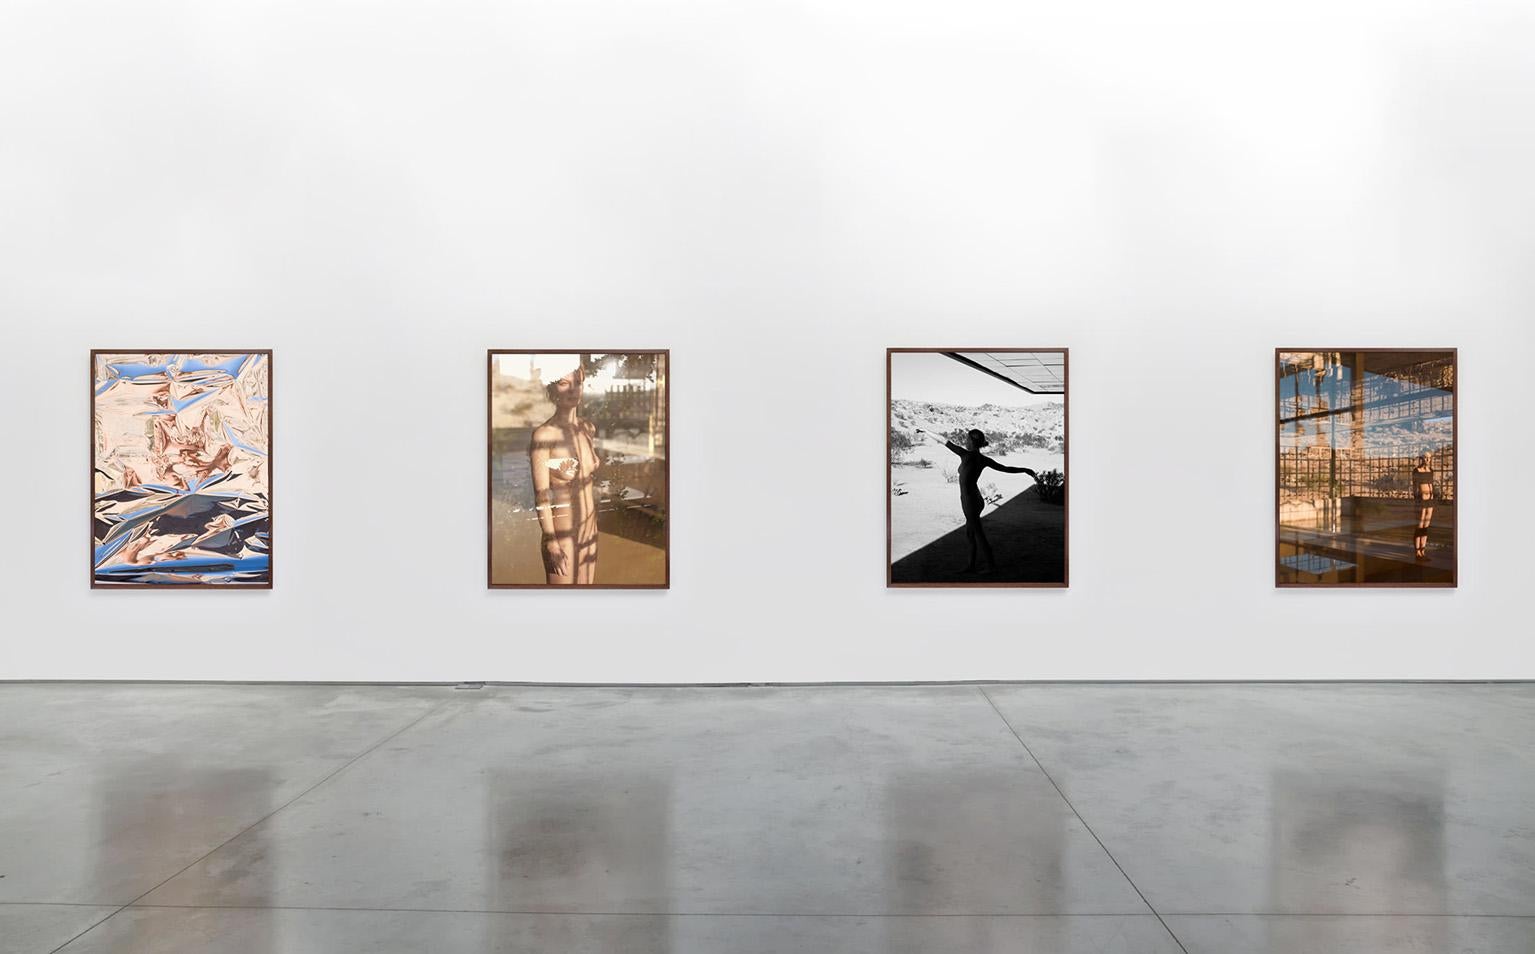 She Disappeared into Complete Silence (AD7394) - large scale abstract photograph - Photograph by Mona Kuhn